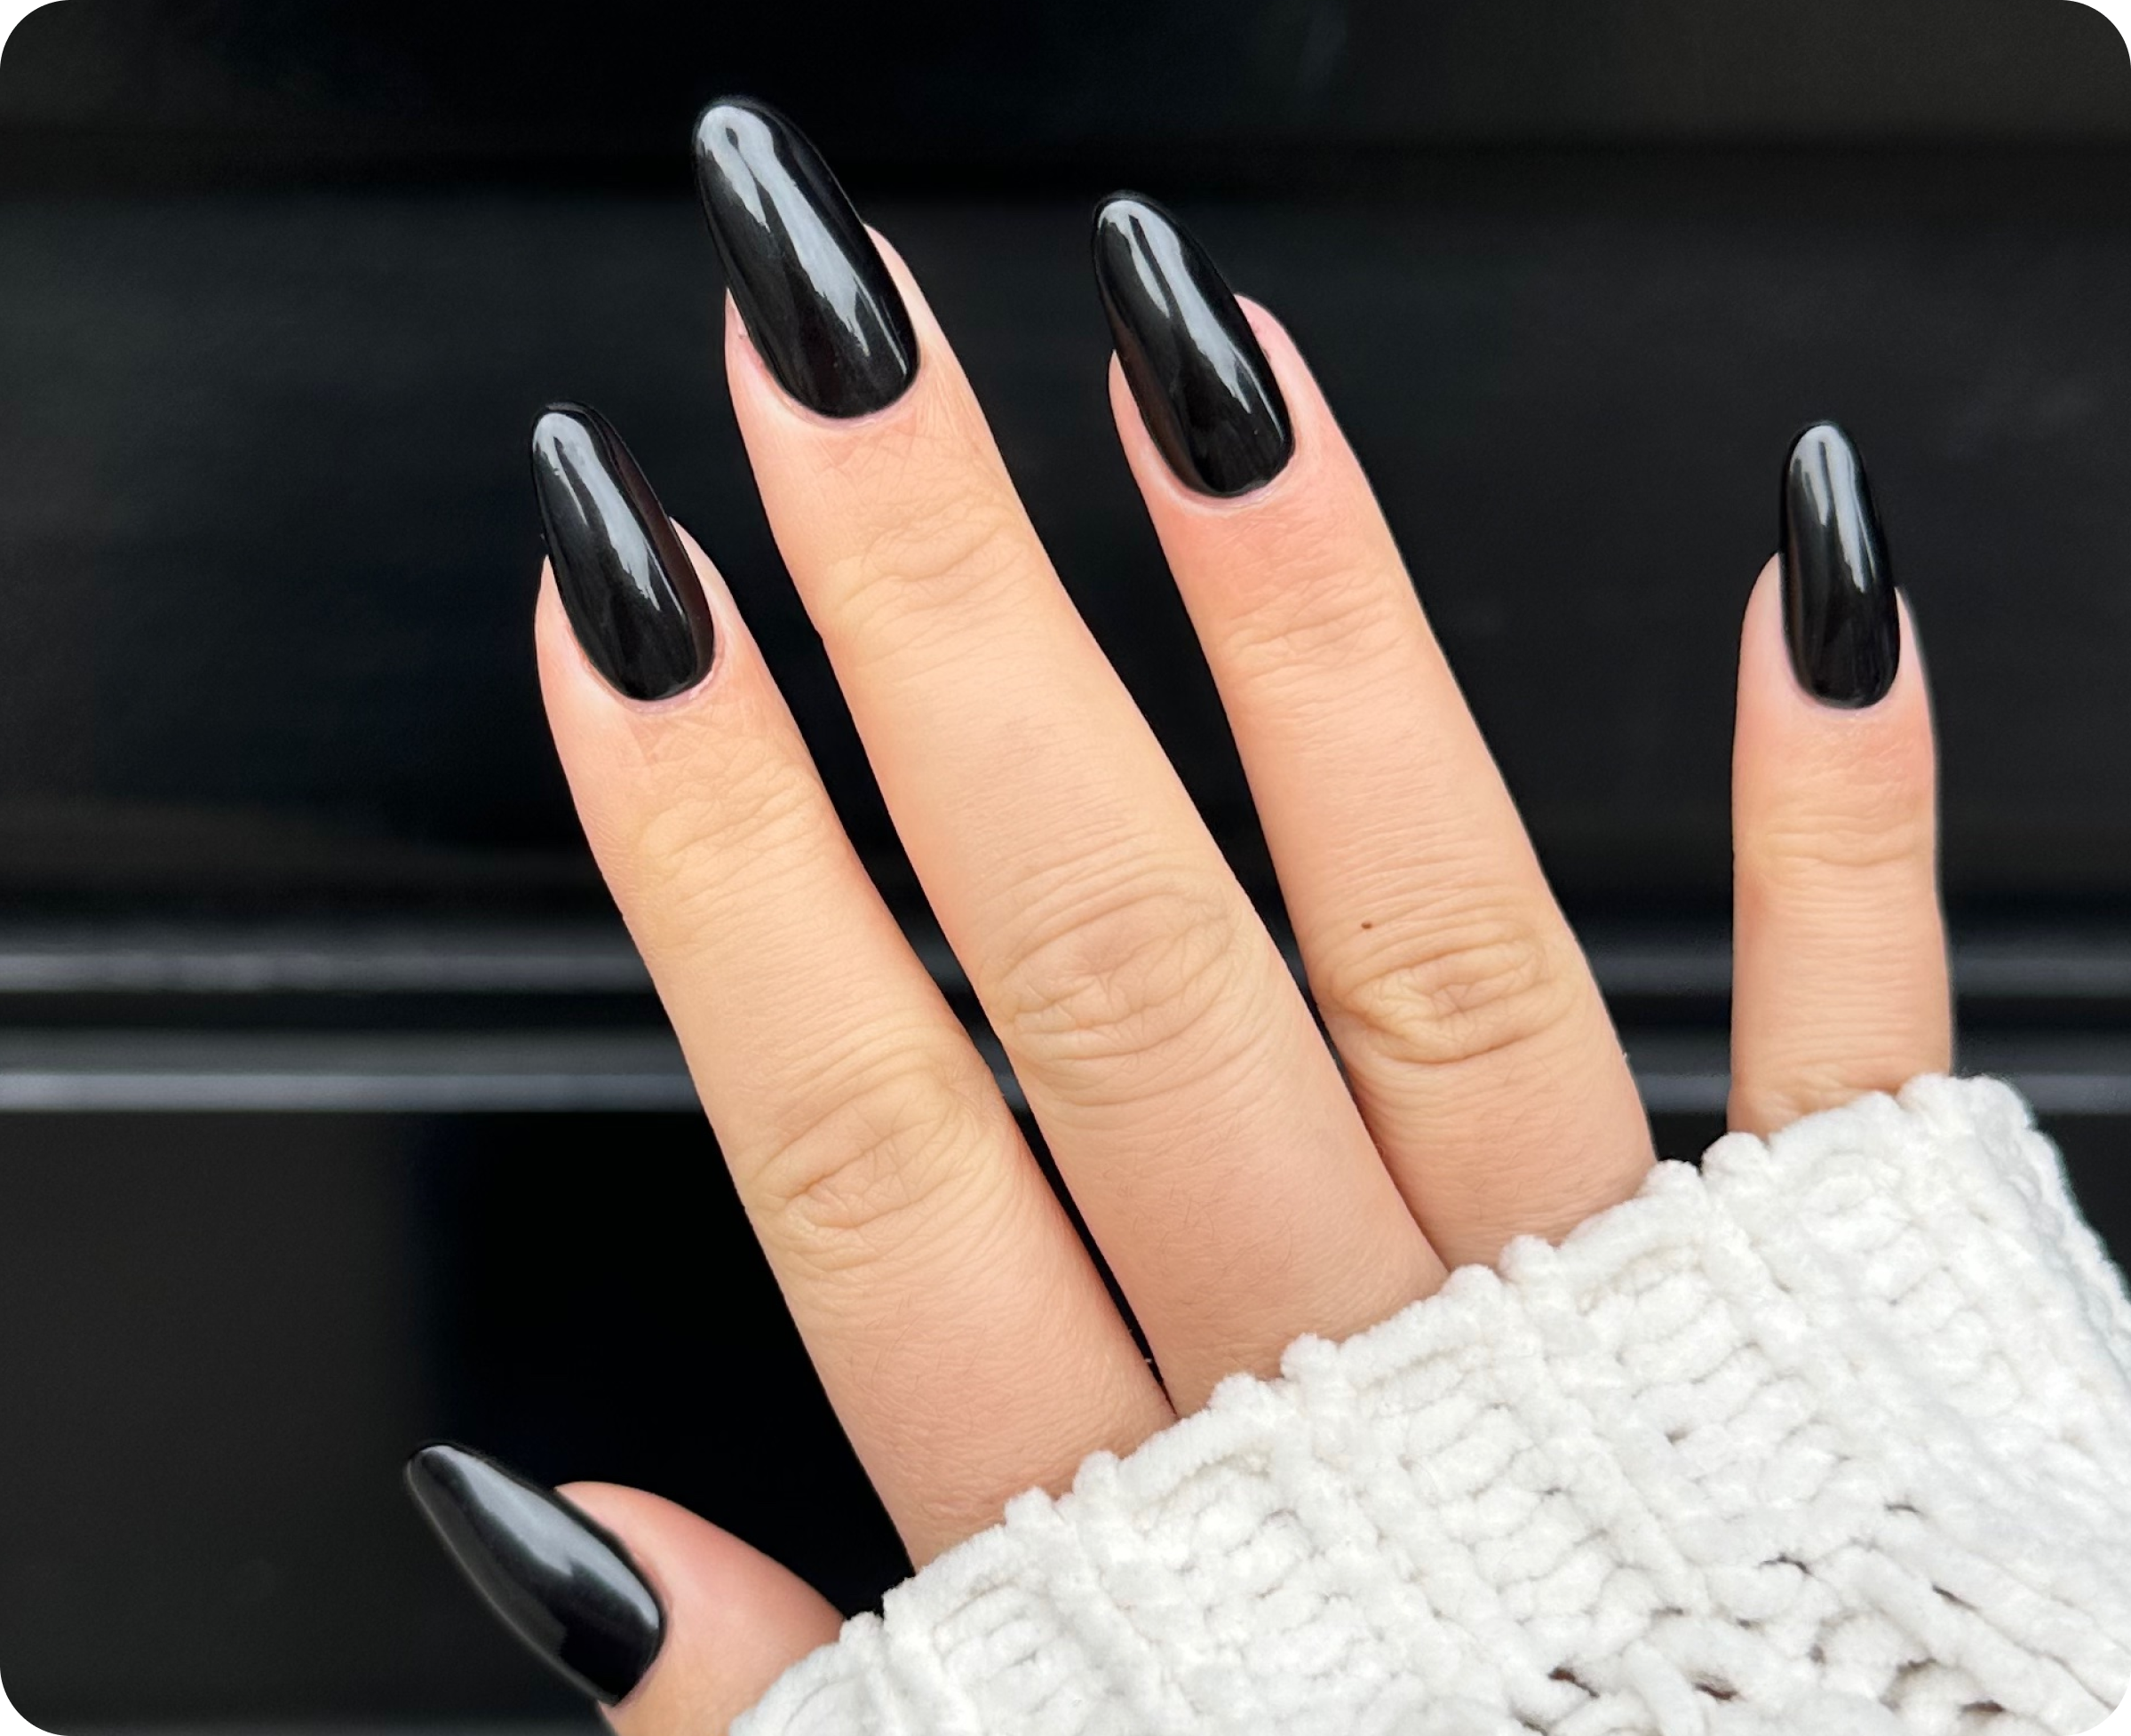 30 Long Nail Ideas For a Statement-Making Mani